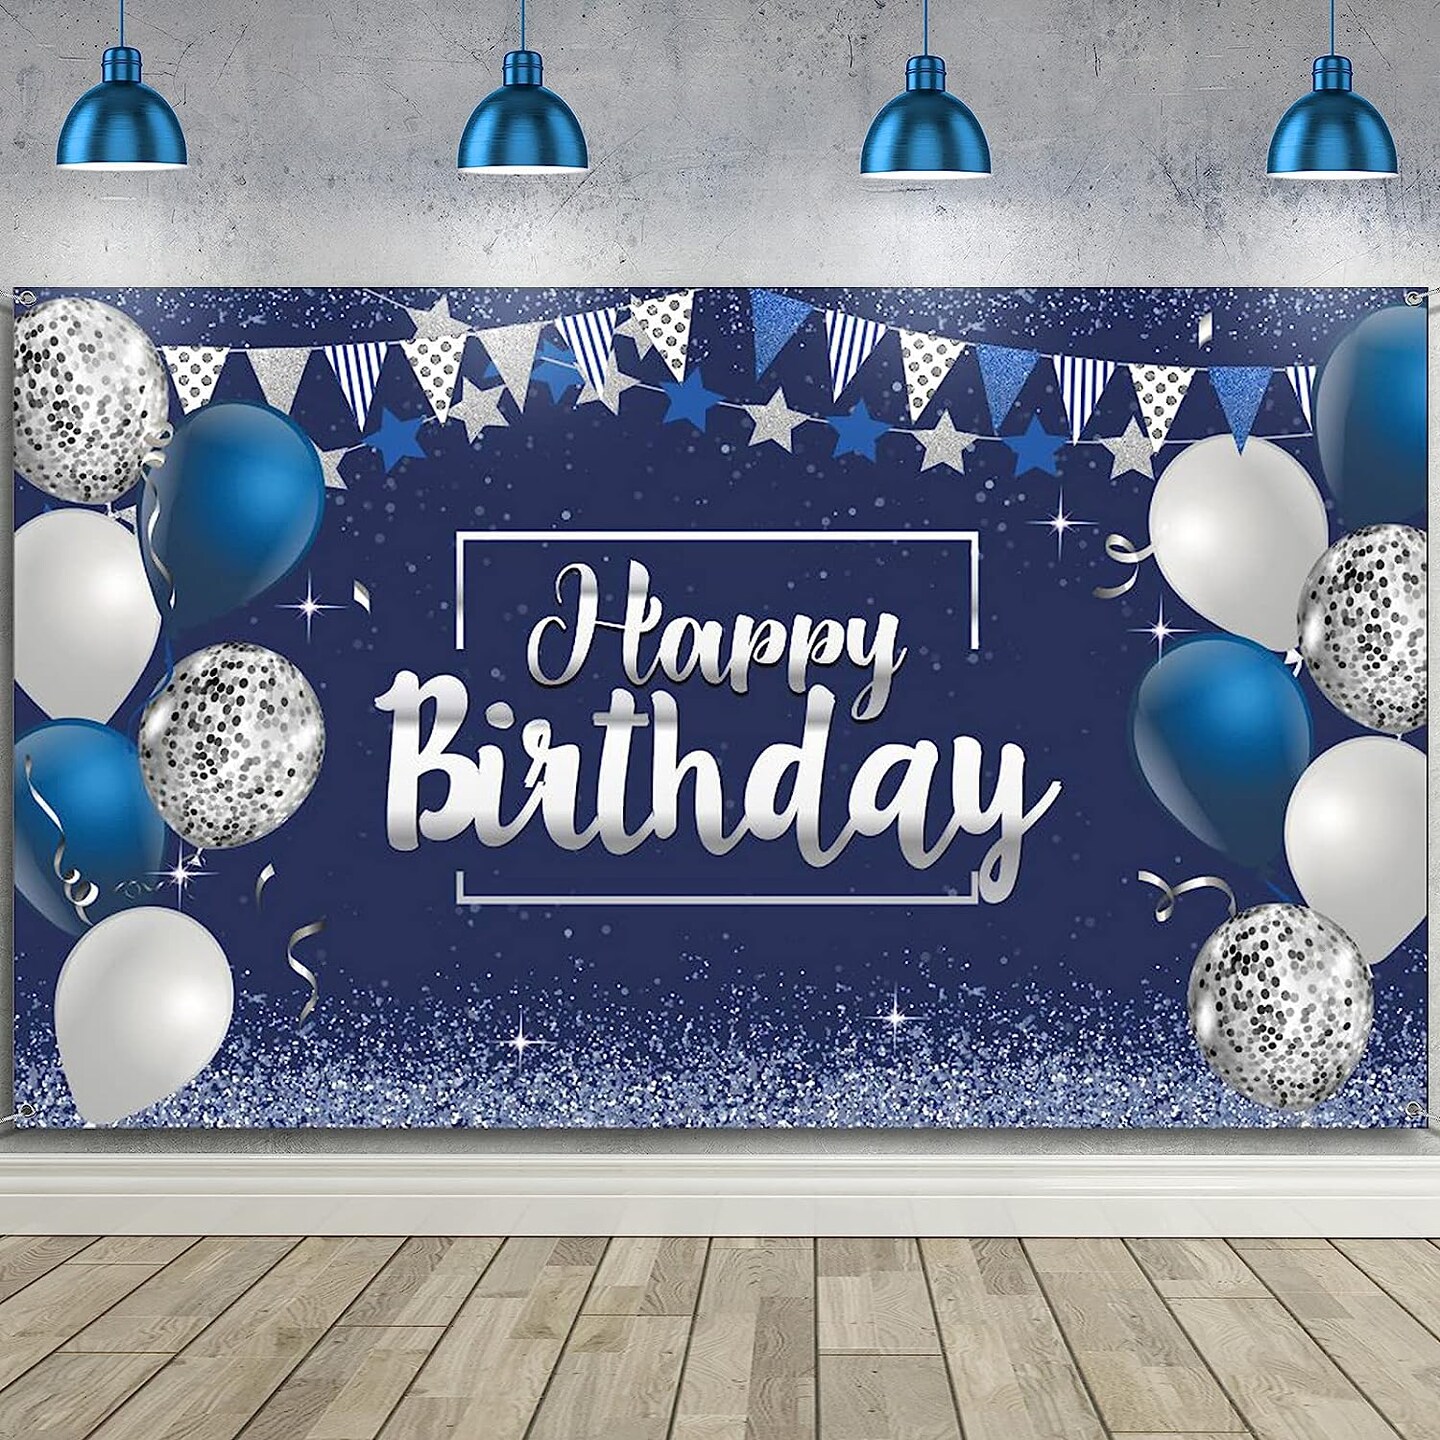 Happy Birthday Decorations Backdrop, Glitter Birthday Backdrop Sign, Happy Birthday Banner, Birthday Party Supplies Photo Background for Children Men Women, 72.8 x 43.3 Inch (Silver and Navy Blue)